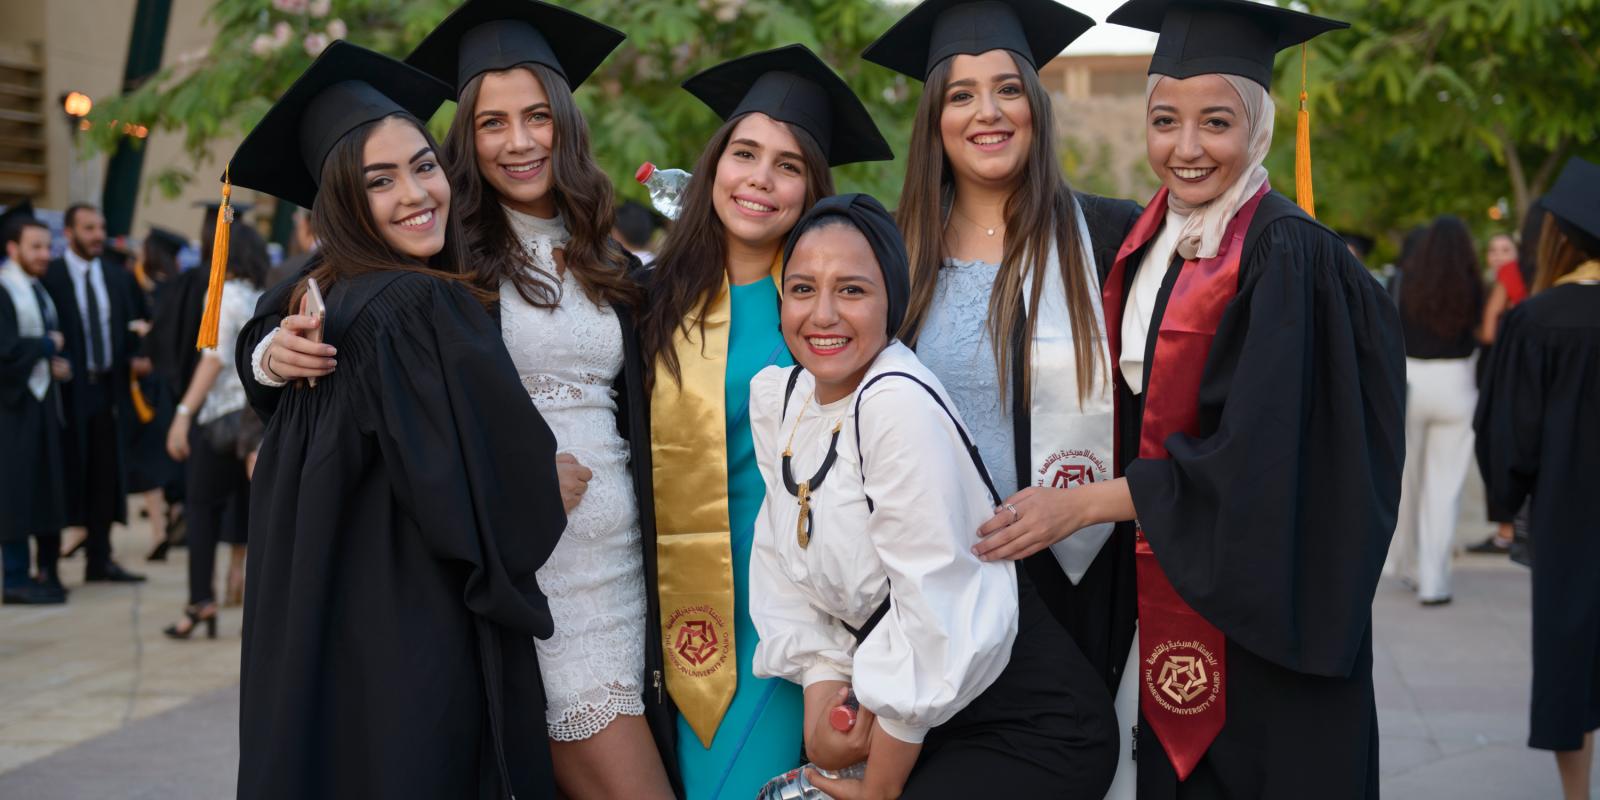 AUC graduates smile as they finish their experience at the University's 2018 Commencement Ceremony.jpg